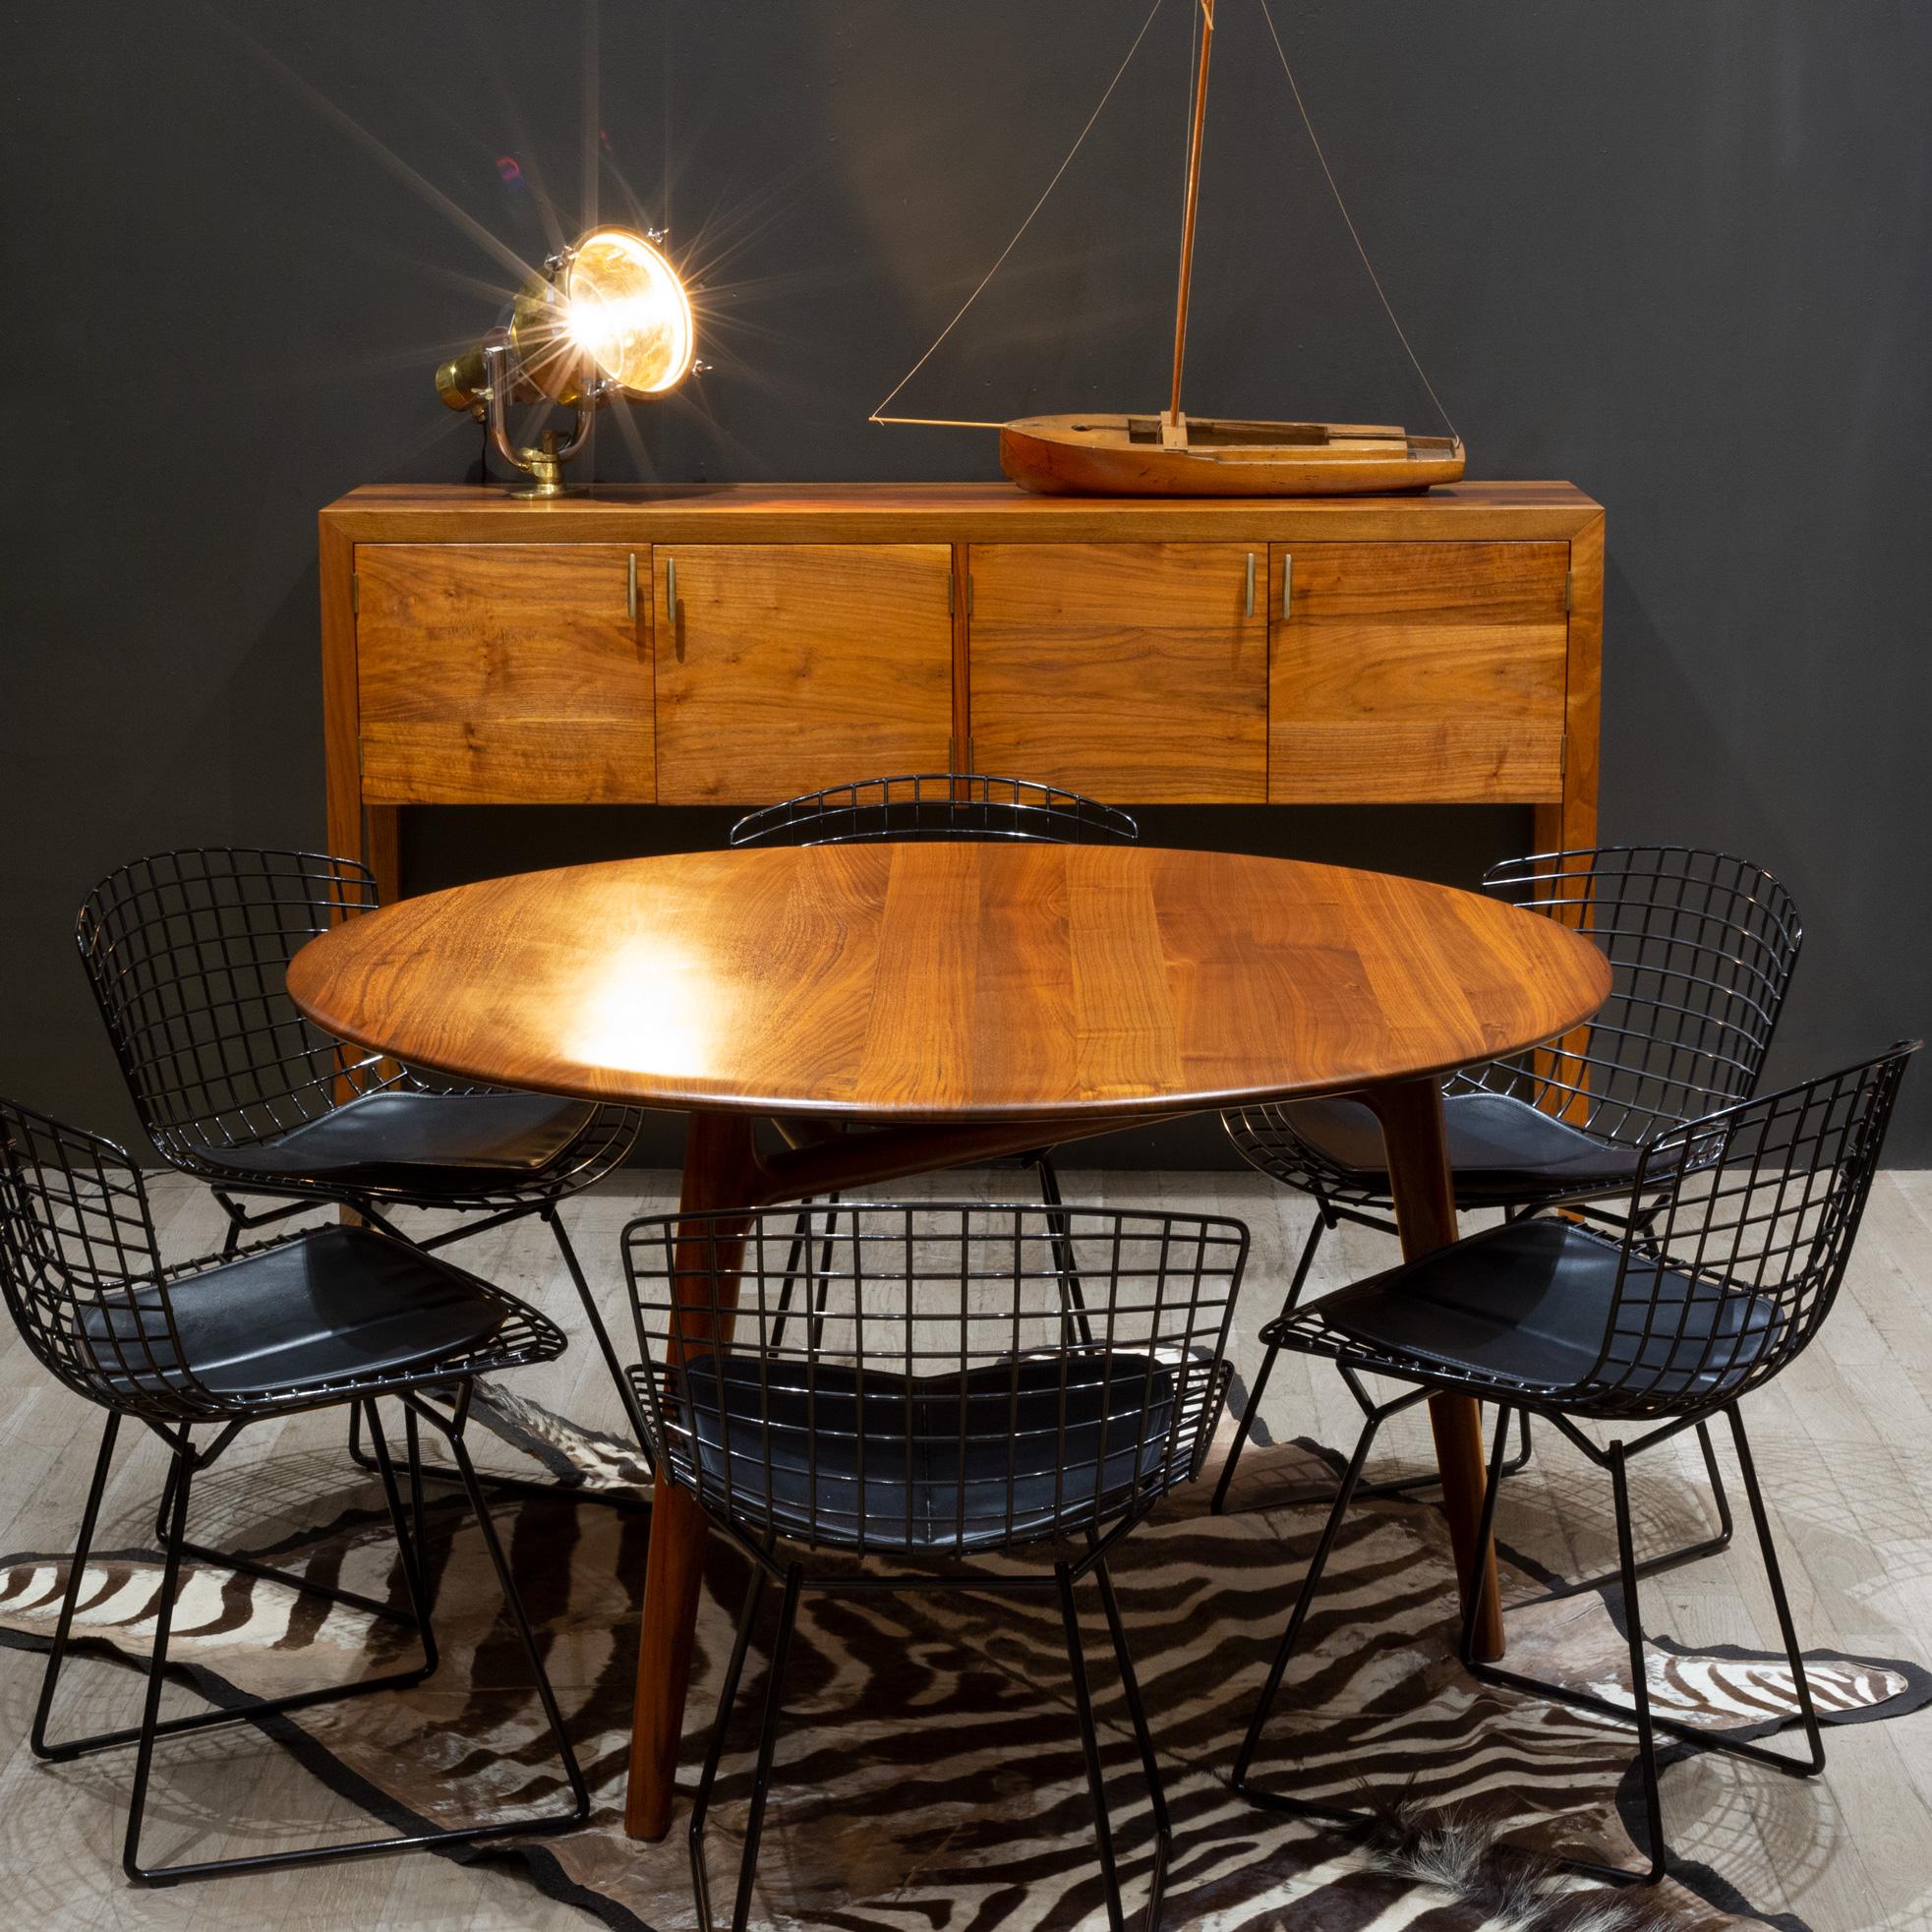 ABOUT

Contact us for more shipping options: S16 Home San Francisco. 

Solo Table is designed to support family life around the table, bringing people together. The tripod leg frame symbolizes this familial connection. Made from generous planks of